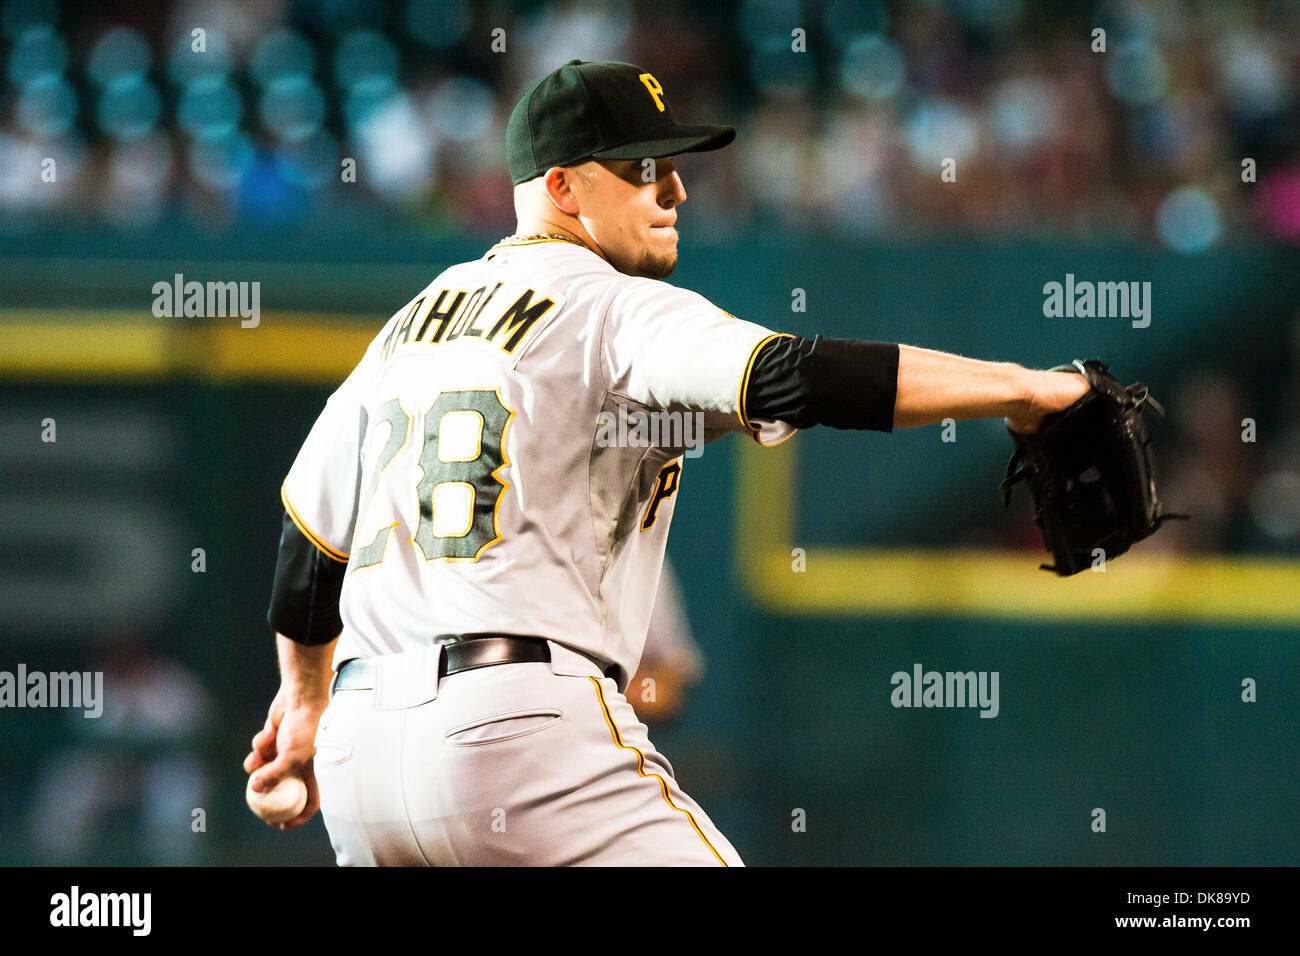 July 16, 2011 - Houston, Texas, U.S - Pittsburgh Pirates P Paul Maholm (28) threw 80-pitches with 59K's against the Astros for a no decision. Houston Astros beat the Pittsburgh Pirates 6-4 at Minute Maid Park in Houston Texas. (Credit Image: © Juan DeLeon/Southcreek Global/ZUMAPRESS.com) Stock Photo